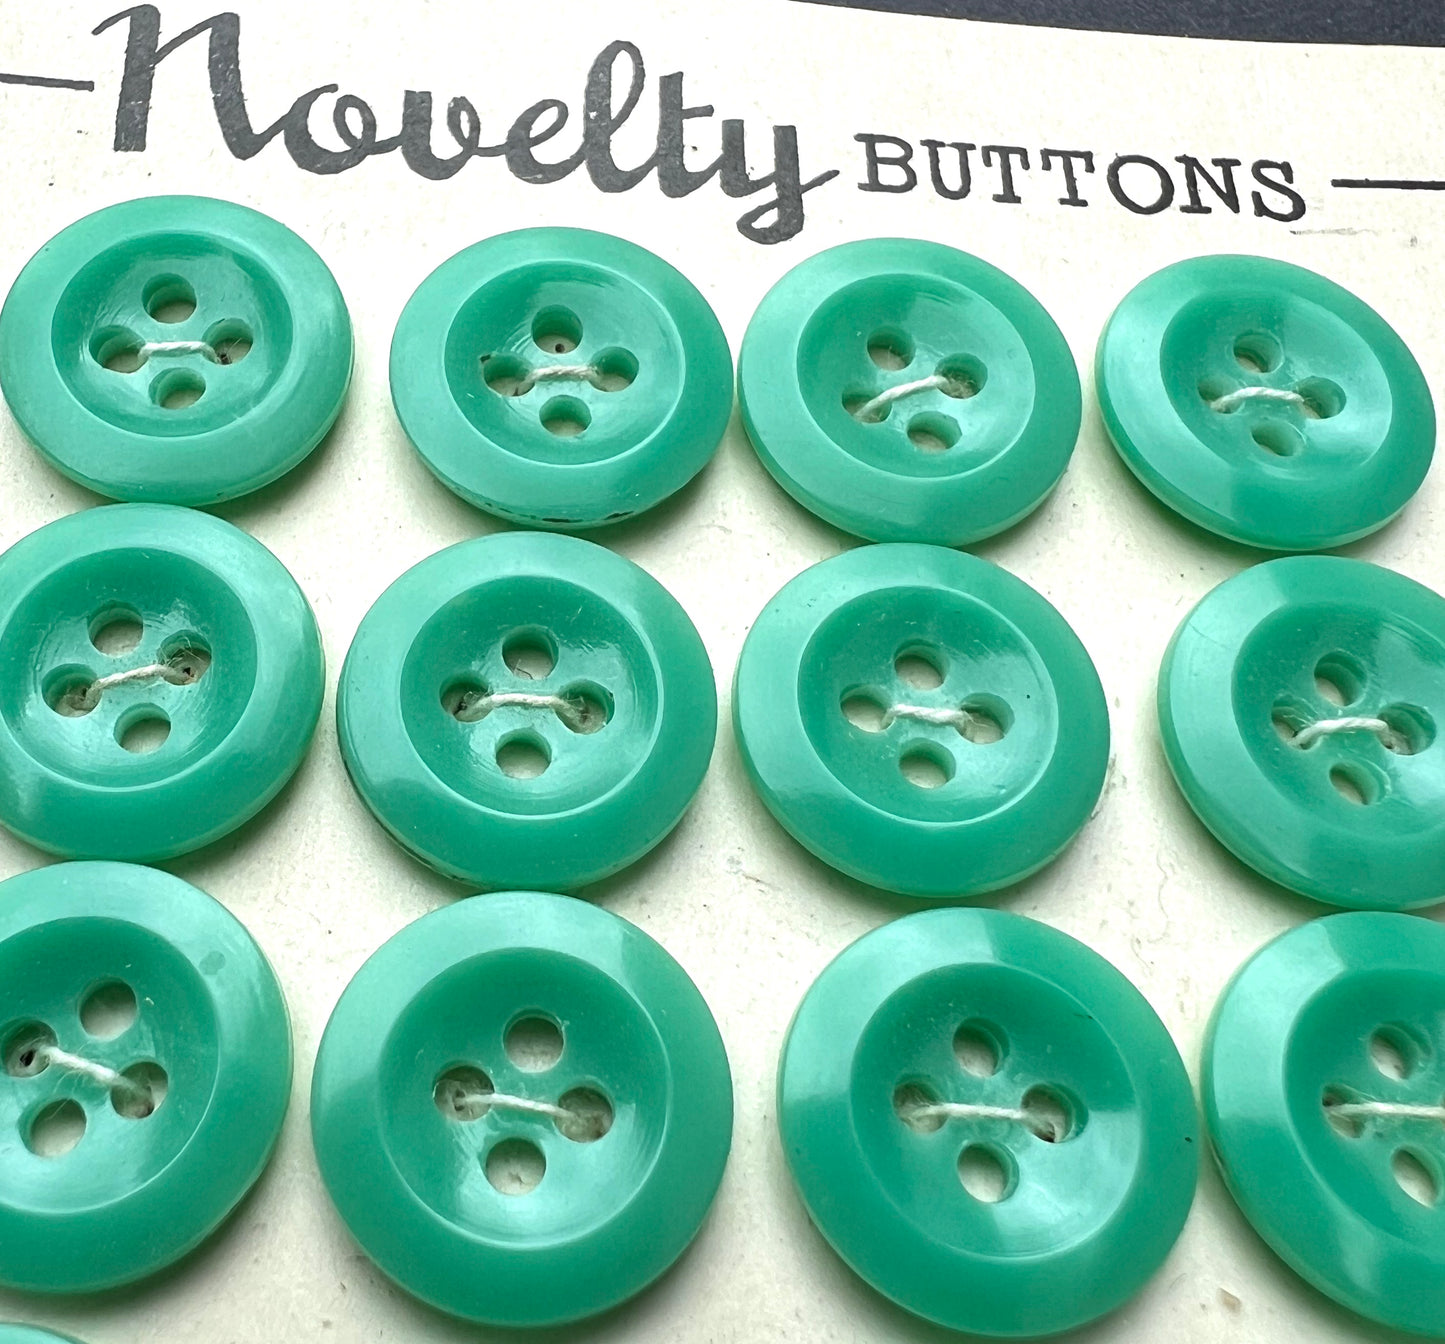 Jade Green 1940s Buttons - 24 x 1cm or 1.3cm